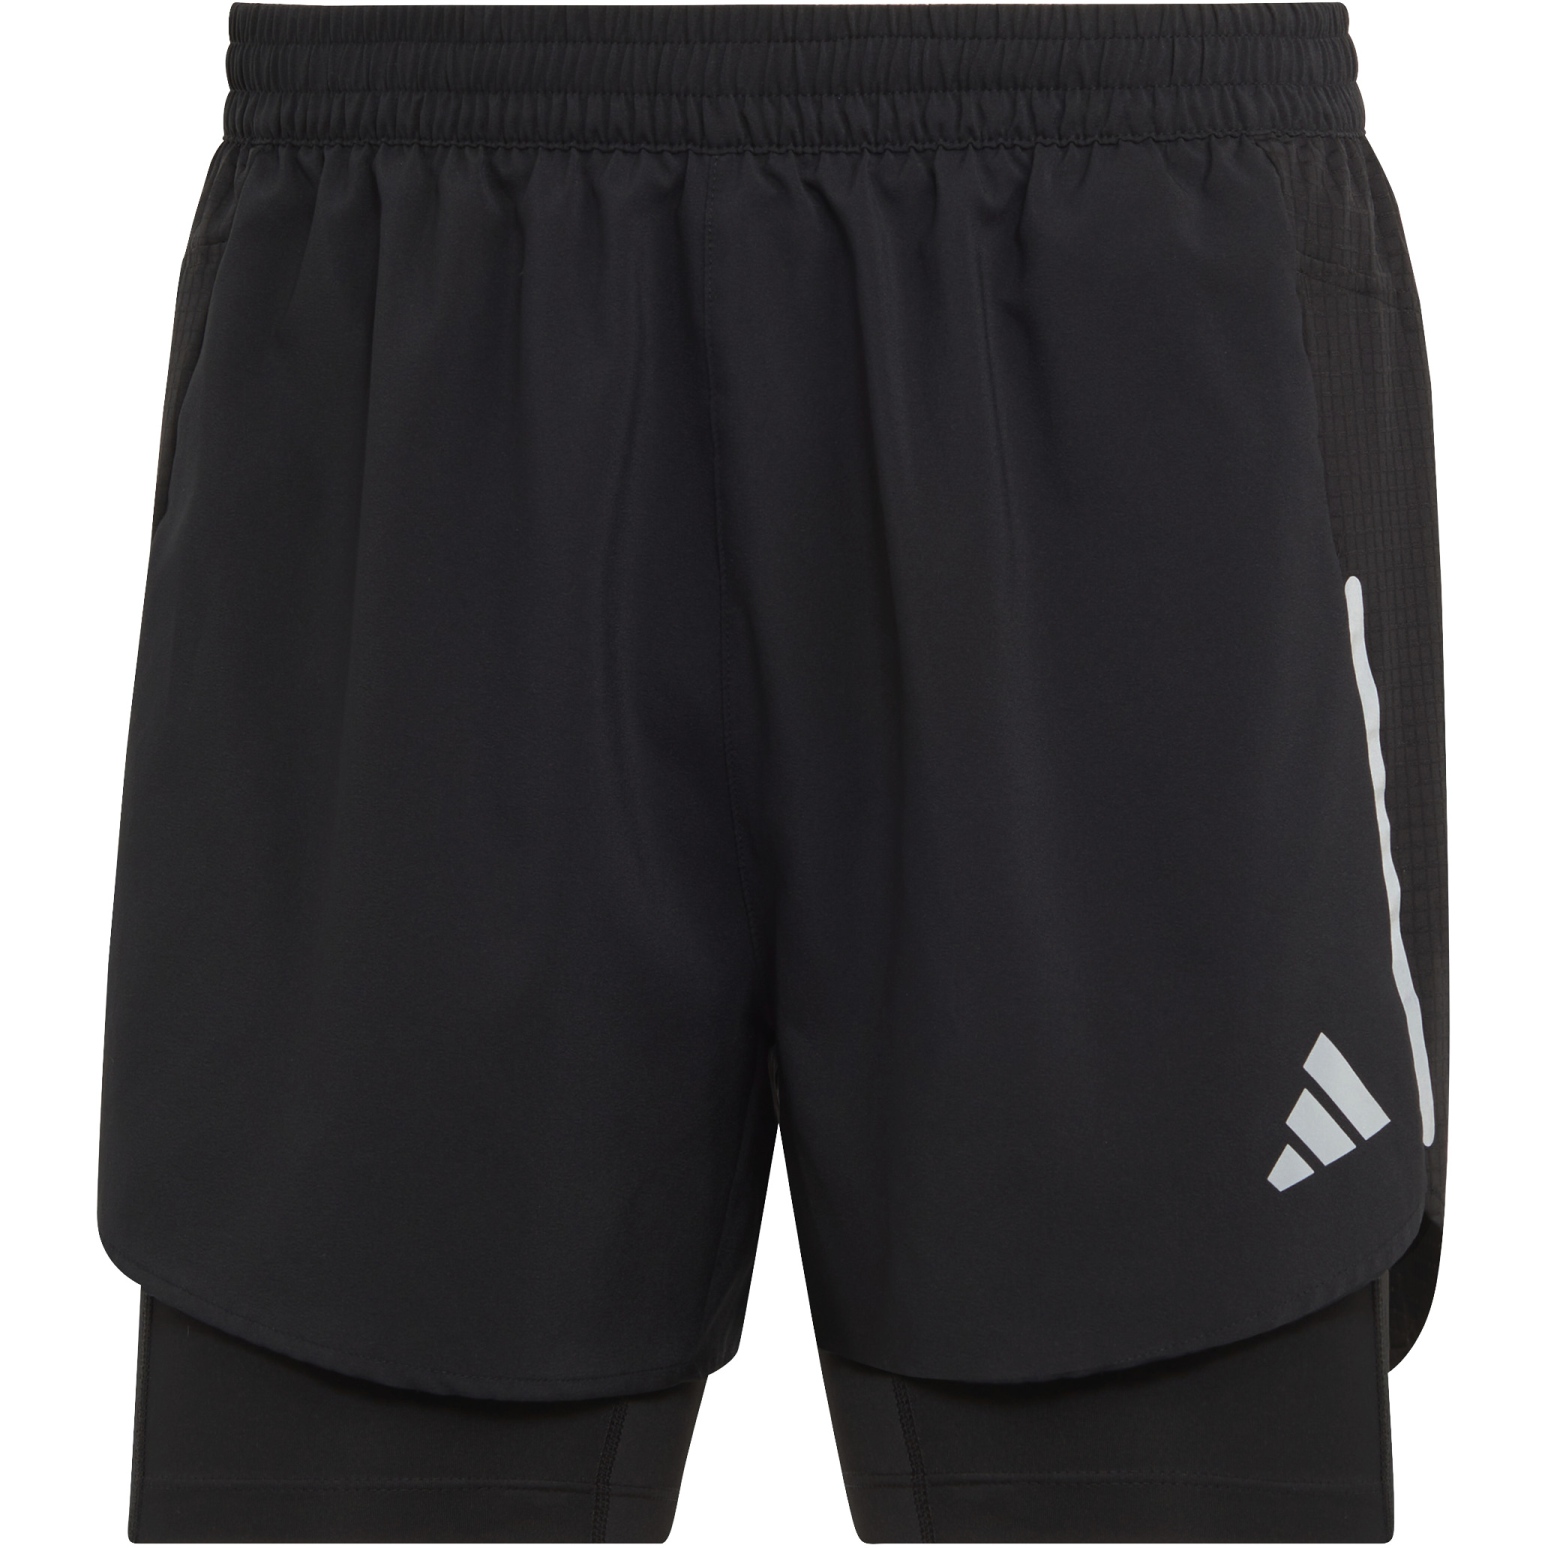 Picture of adidas Designed for Running 2-in-1 Shorts Men - black HN8023